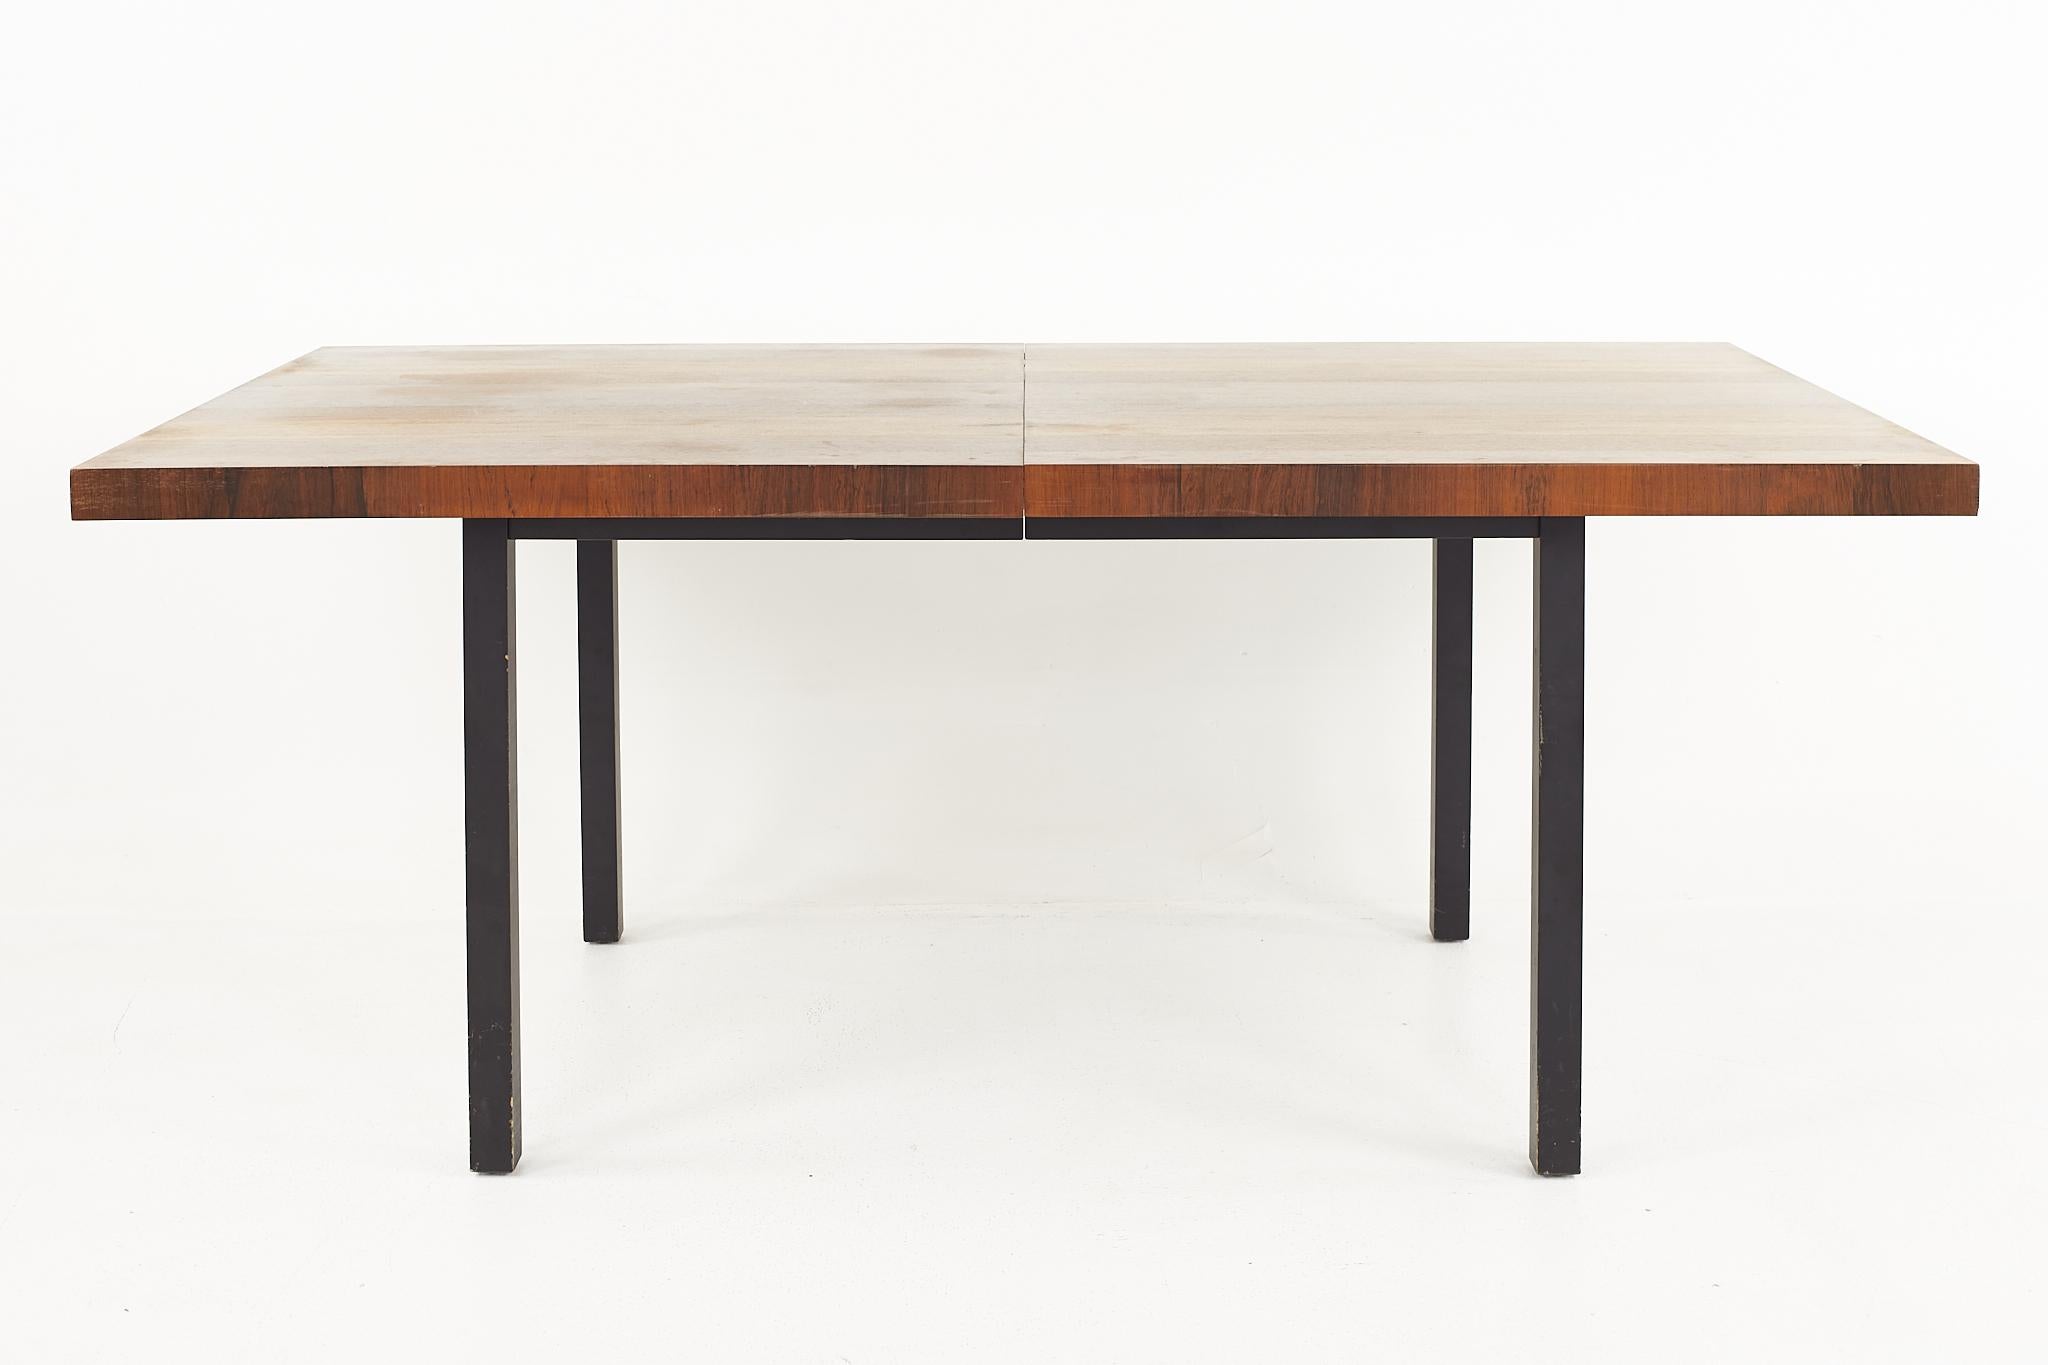 Milo Baughman for Directional mid century multi-wood dining table

This table measures: 60 wide x 38 deep x 28.75 high, with a chair clearance of 25.75 inches, each leaf measures 20 wide, making a maximum table width of 100 inches when both leaves